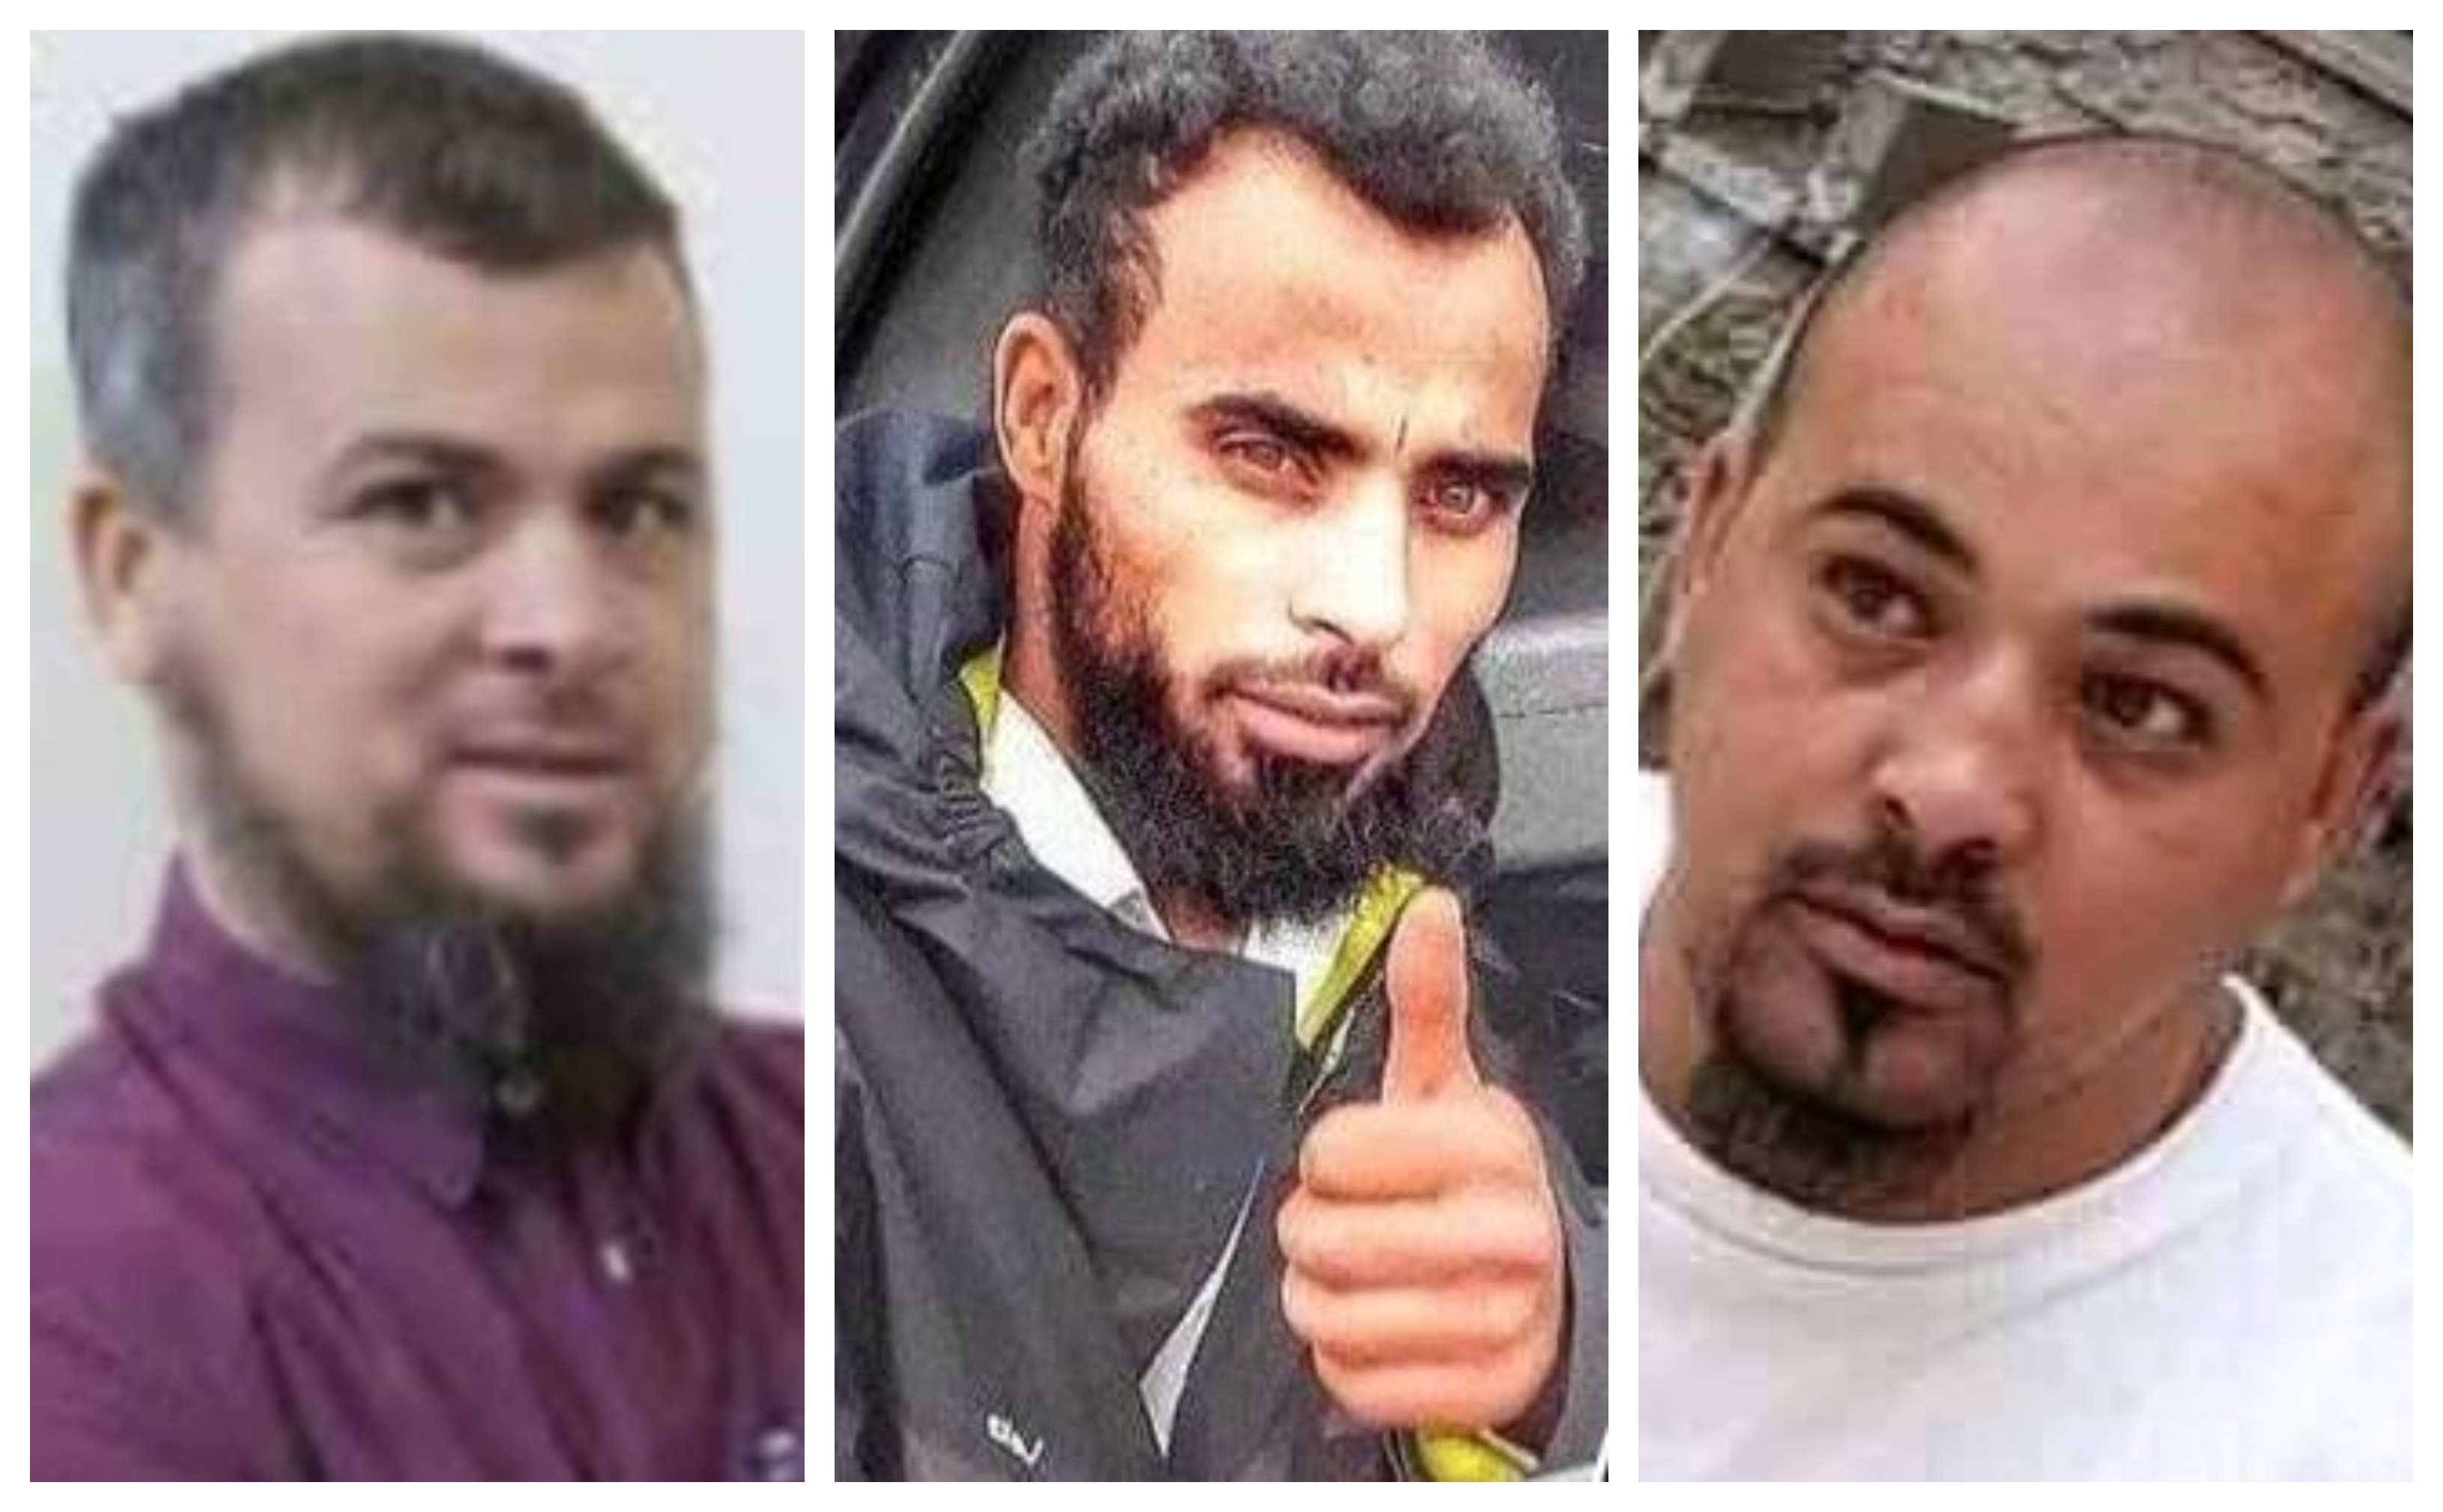 A combination of photos showing Mohammed, Mohsen and Abdul-Rahim al-Kani (Social media)